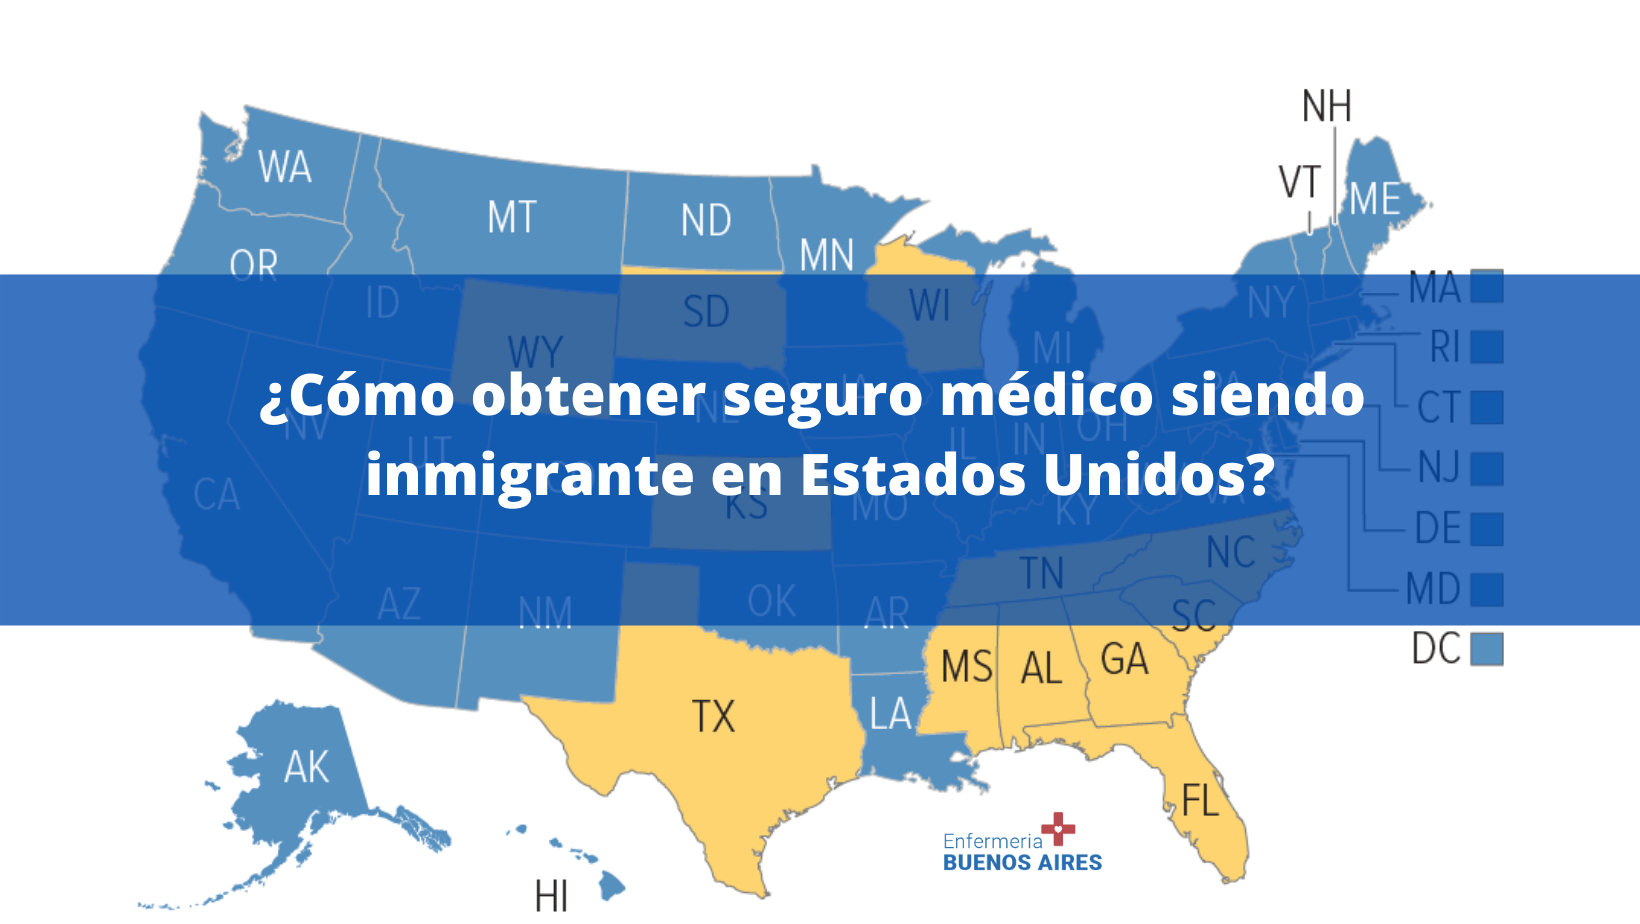 ¿How to get health insurance as an immigrant in the United States?